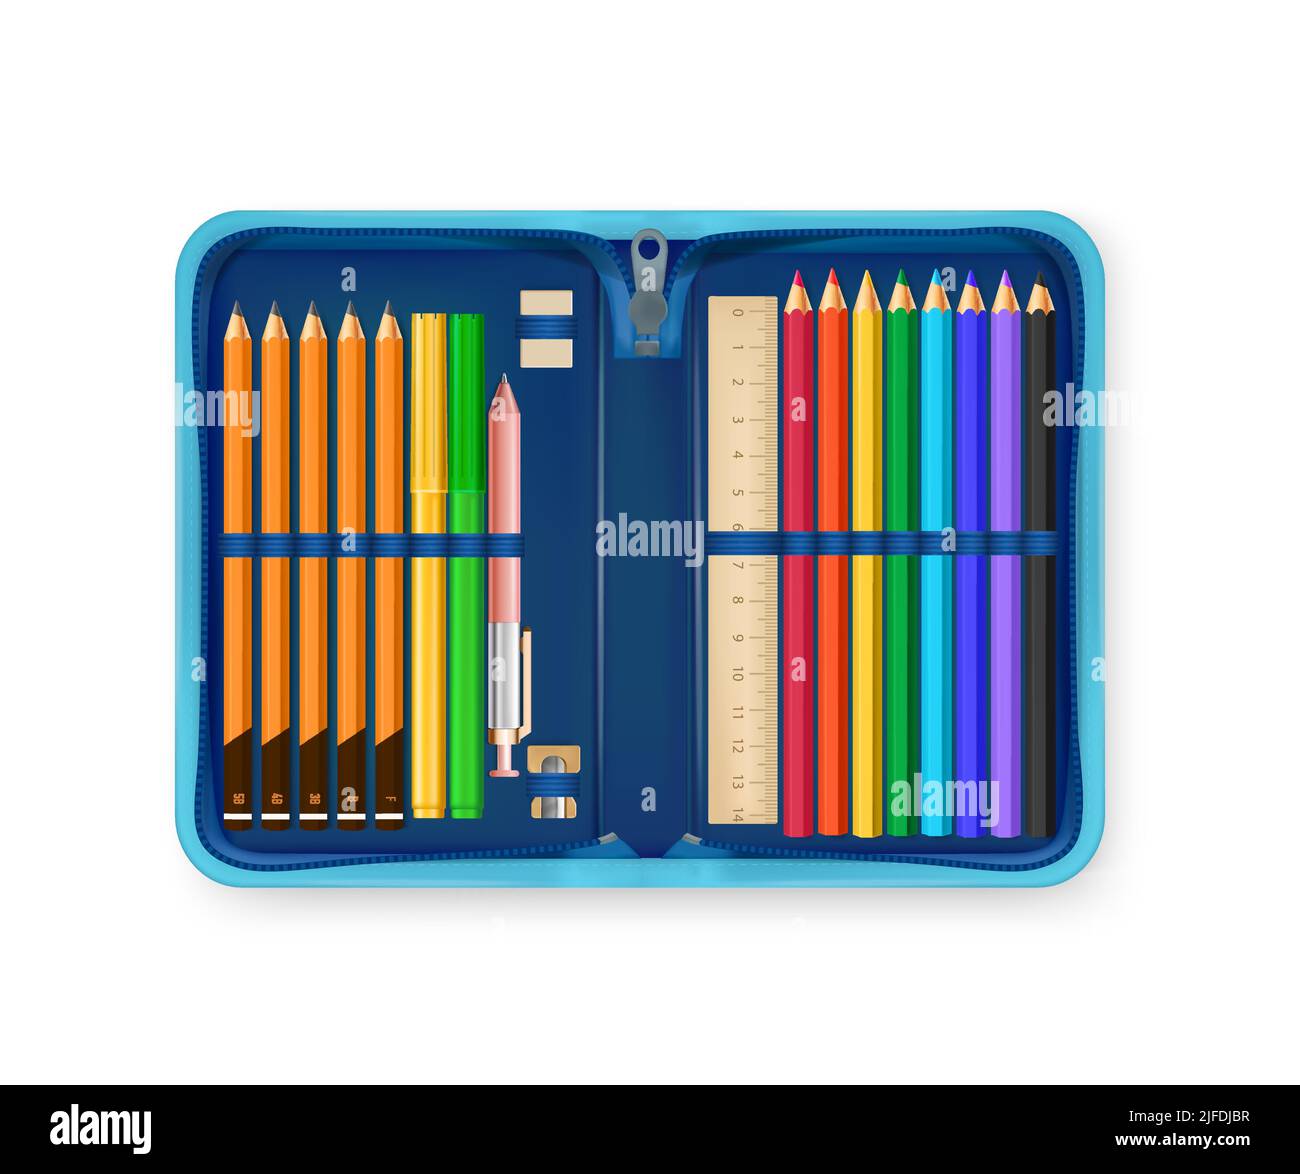 https://c8.alamy.com/comp/2JFDJBR/realistic-open-pencil-case-in-blue-color-with-various-school-accessories-for-writing-and-drawing-vector-illustration-2JFDJBR.jpg